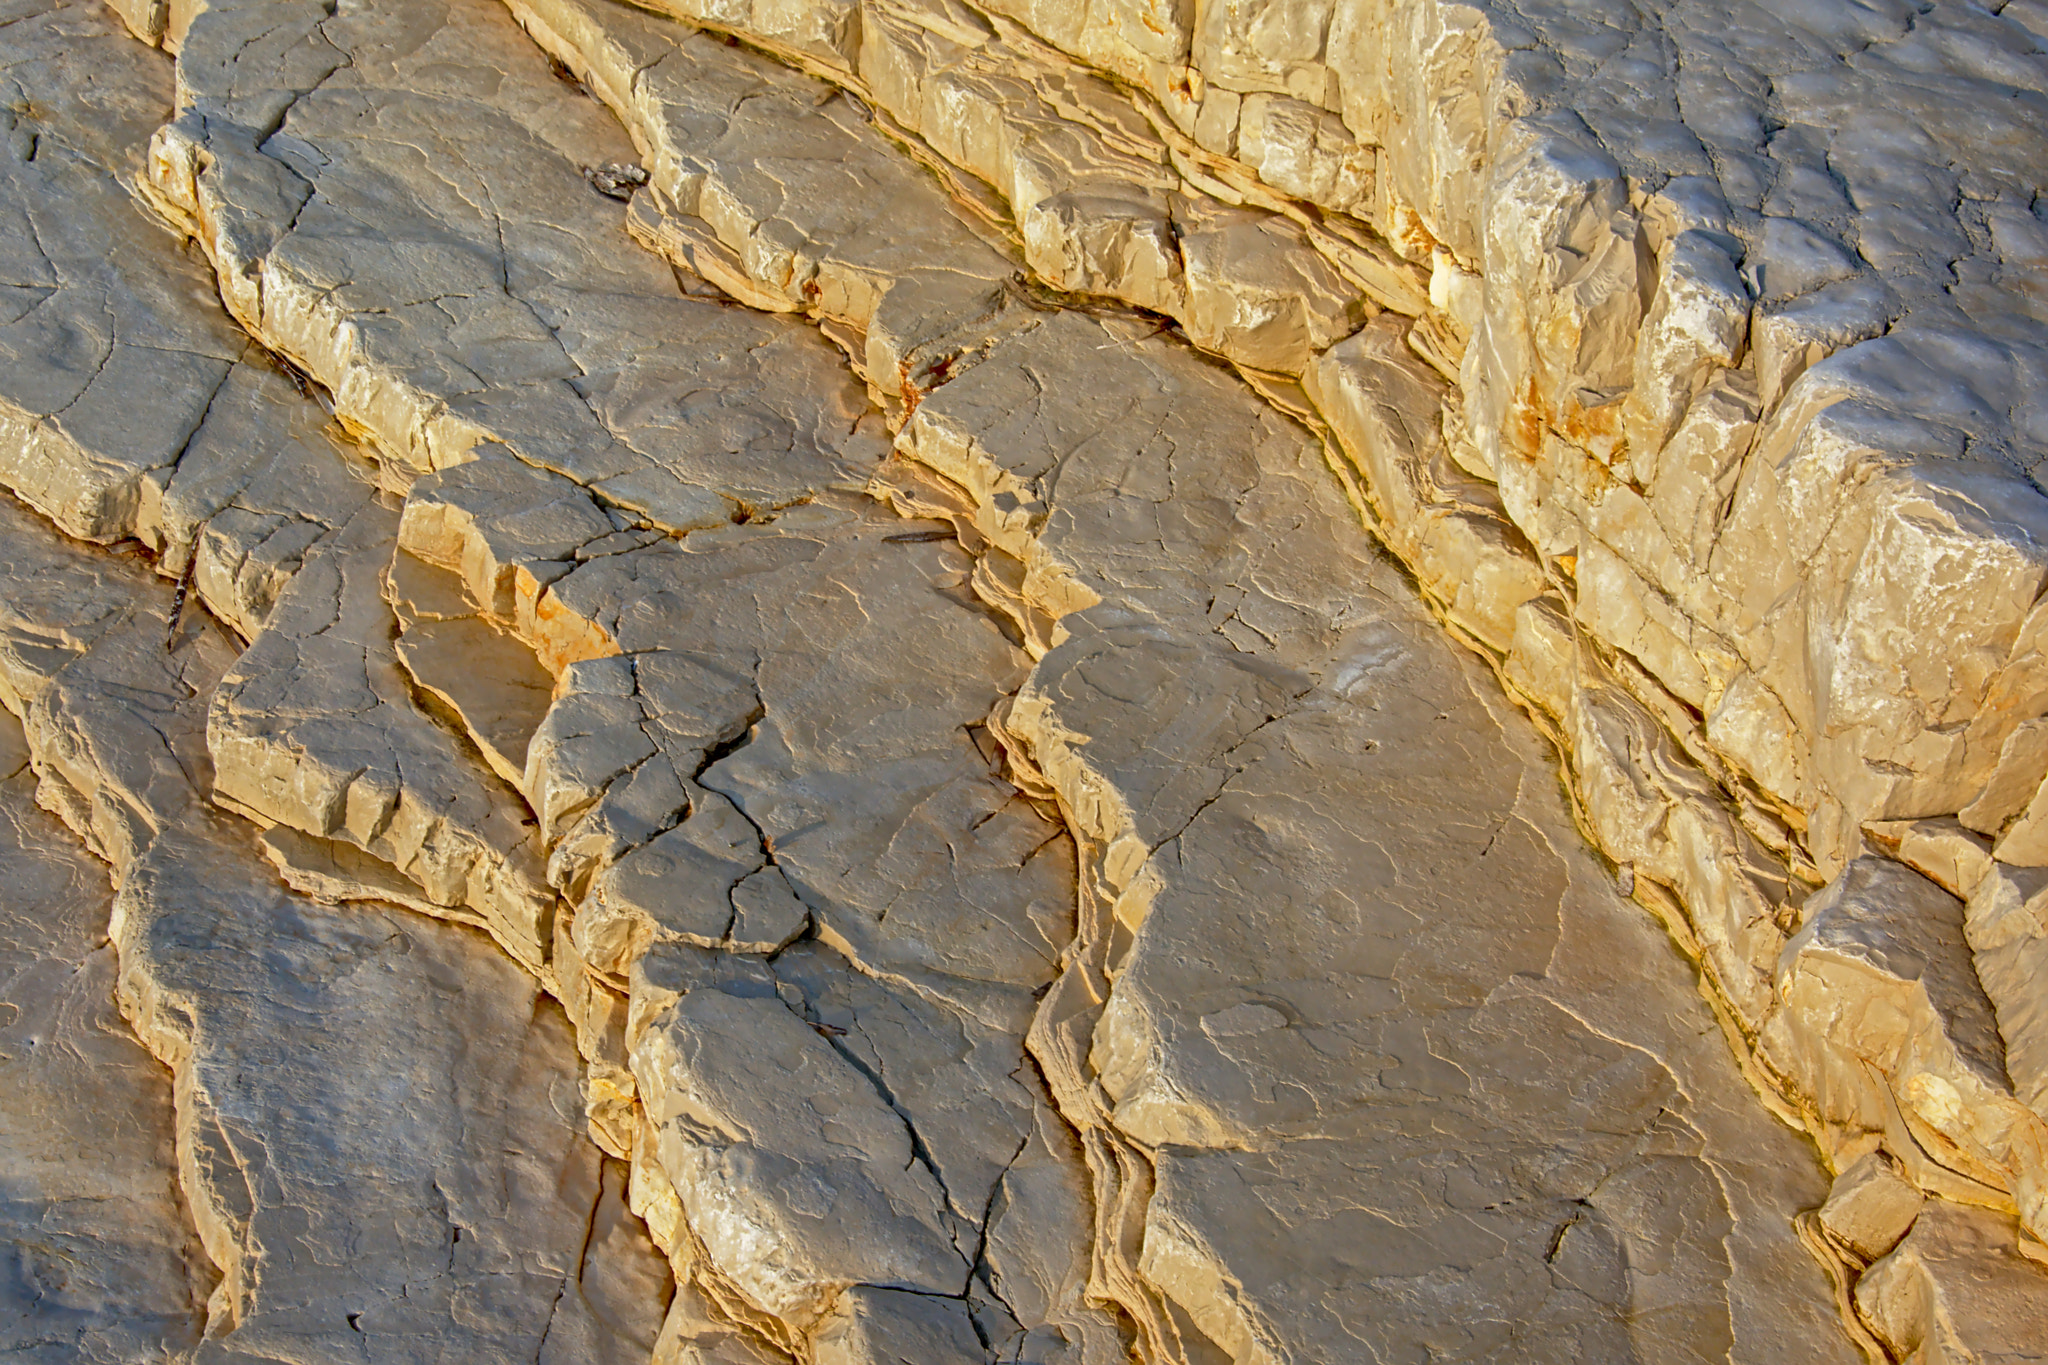 Nikon D5200 sample photo. Cracked limestone rock with sun and shadow pattern photography